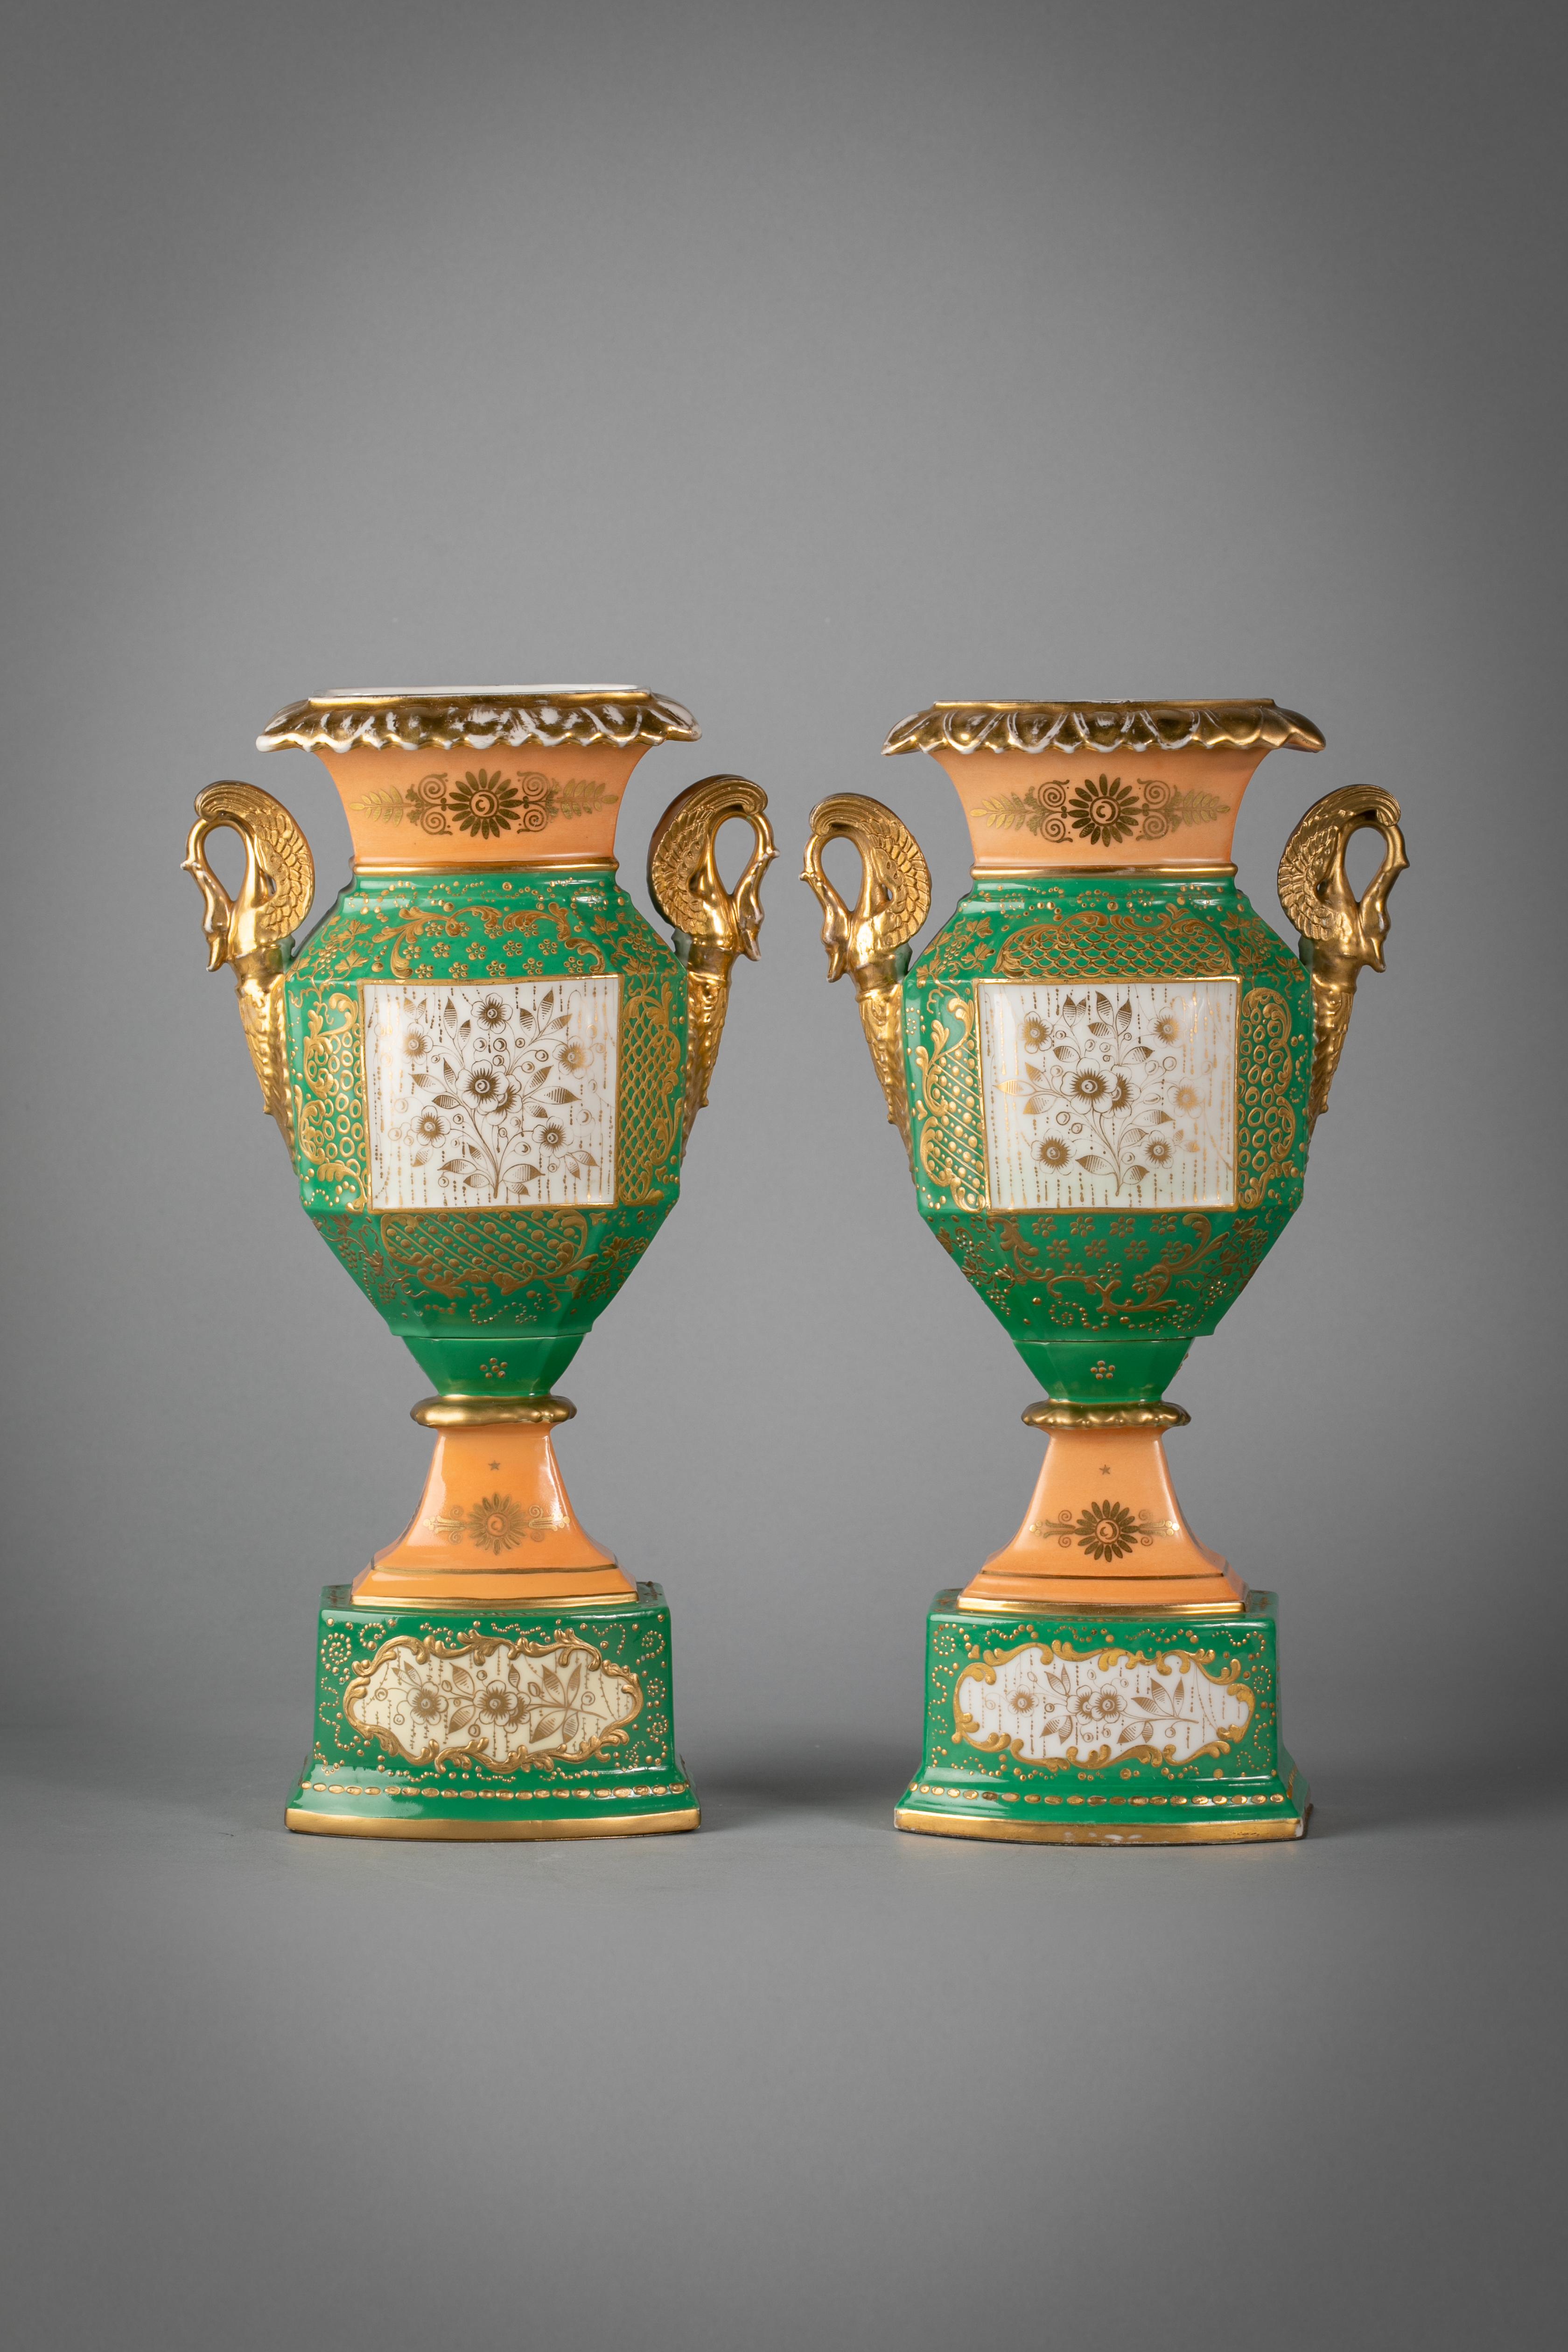 With fine gilding and gilt swan handles. The portraits with beautifully detailed portraits.